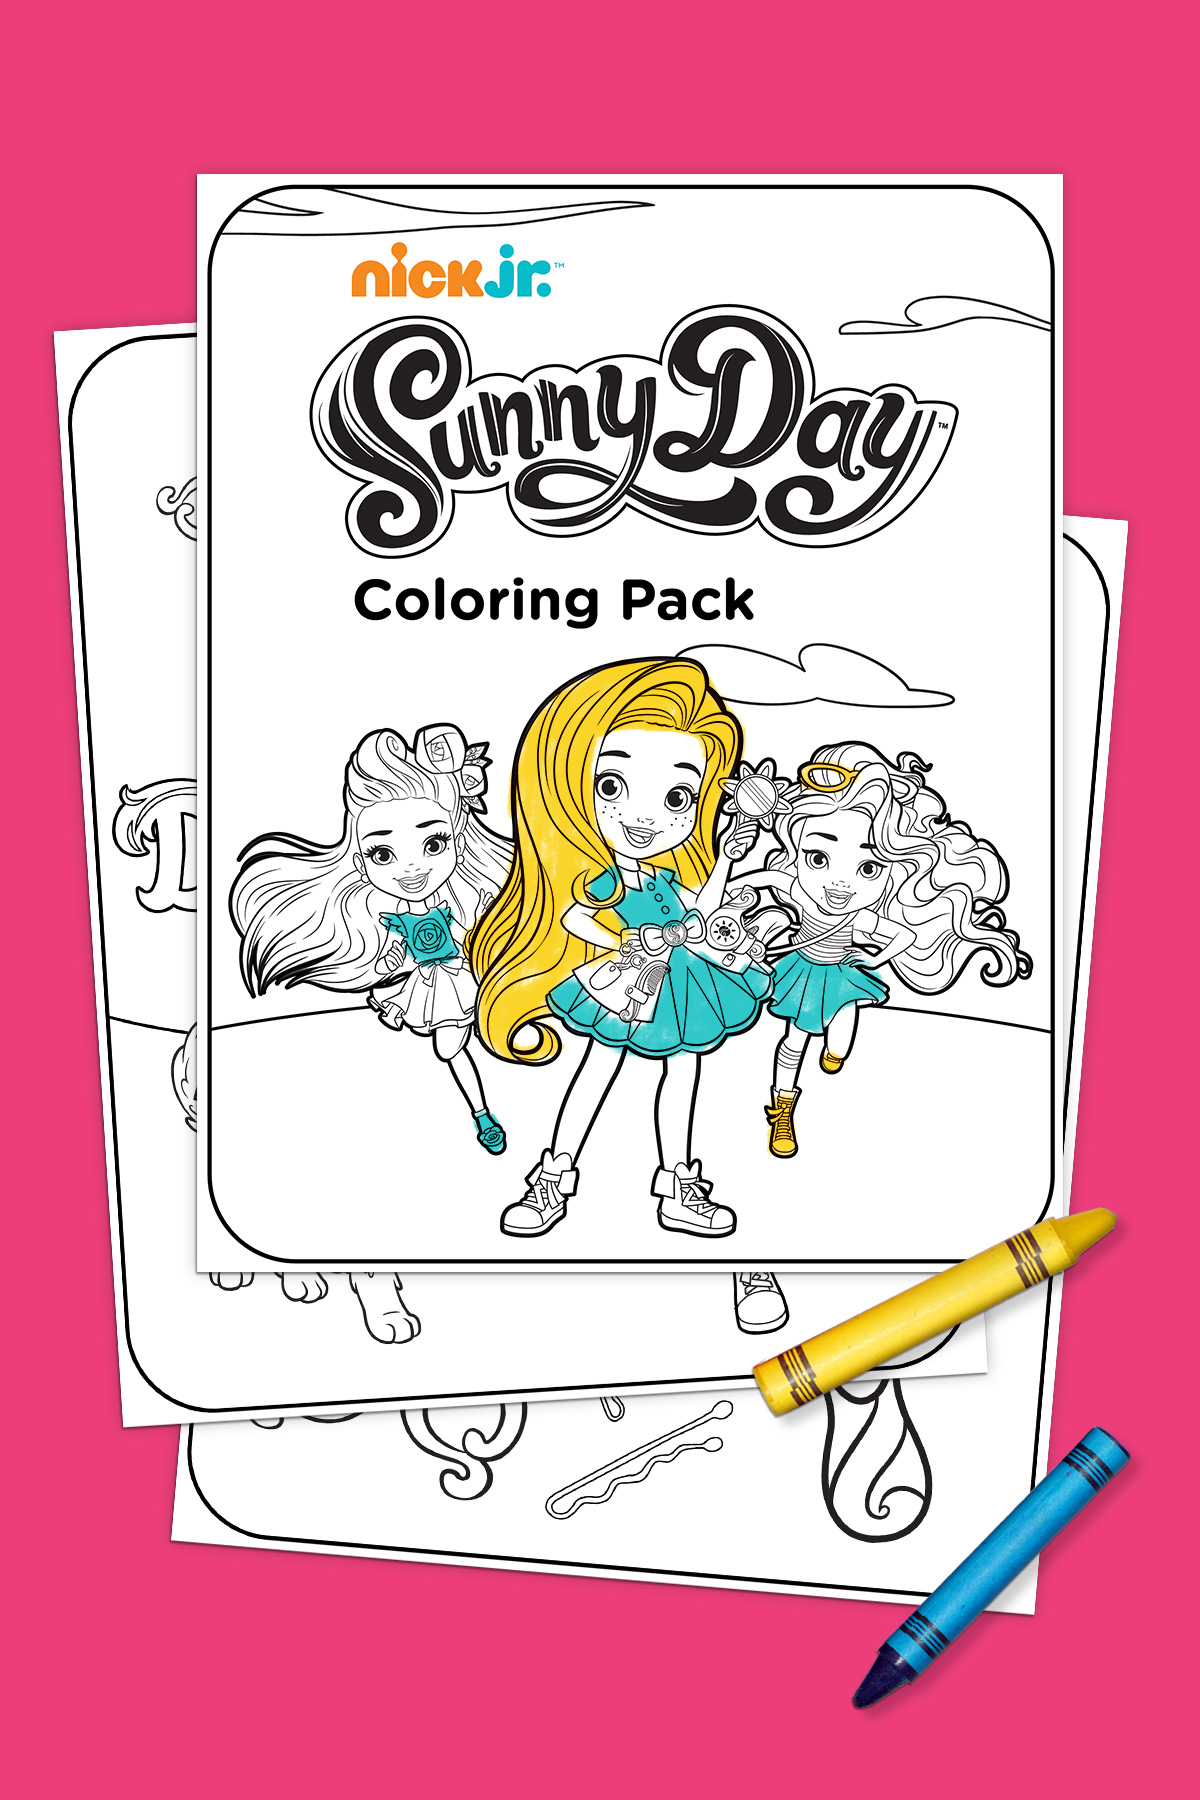 Sunny Day Coloring Pack